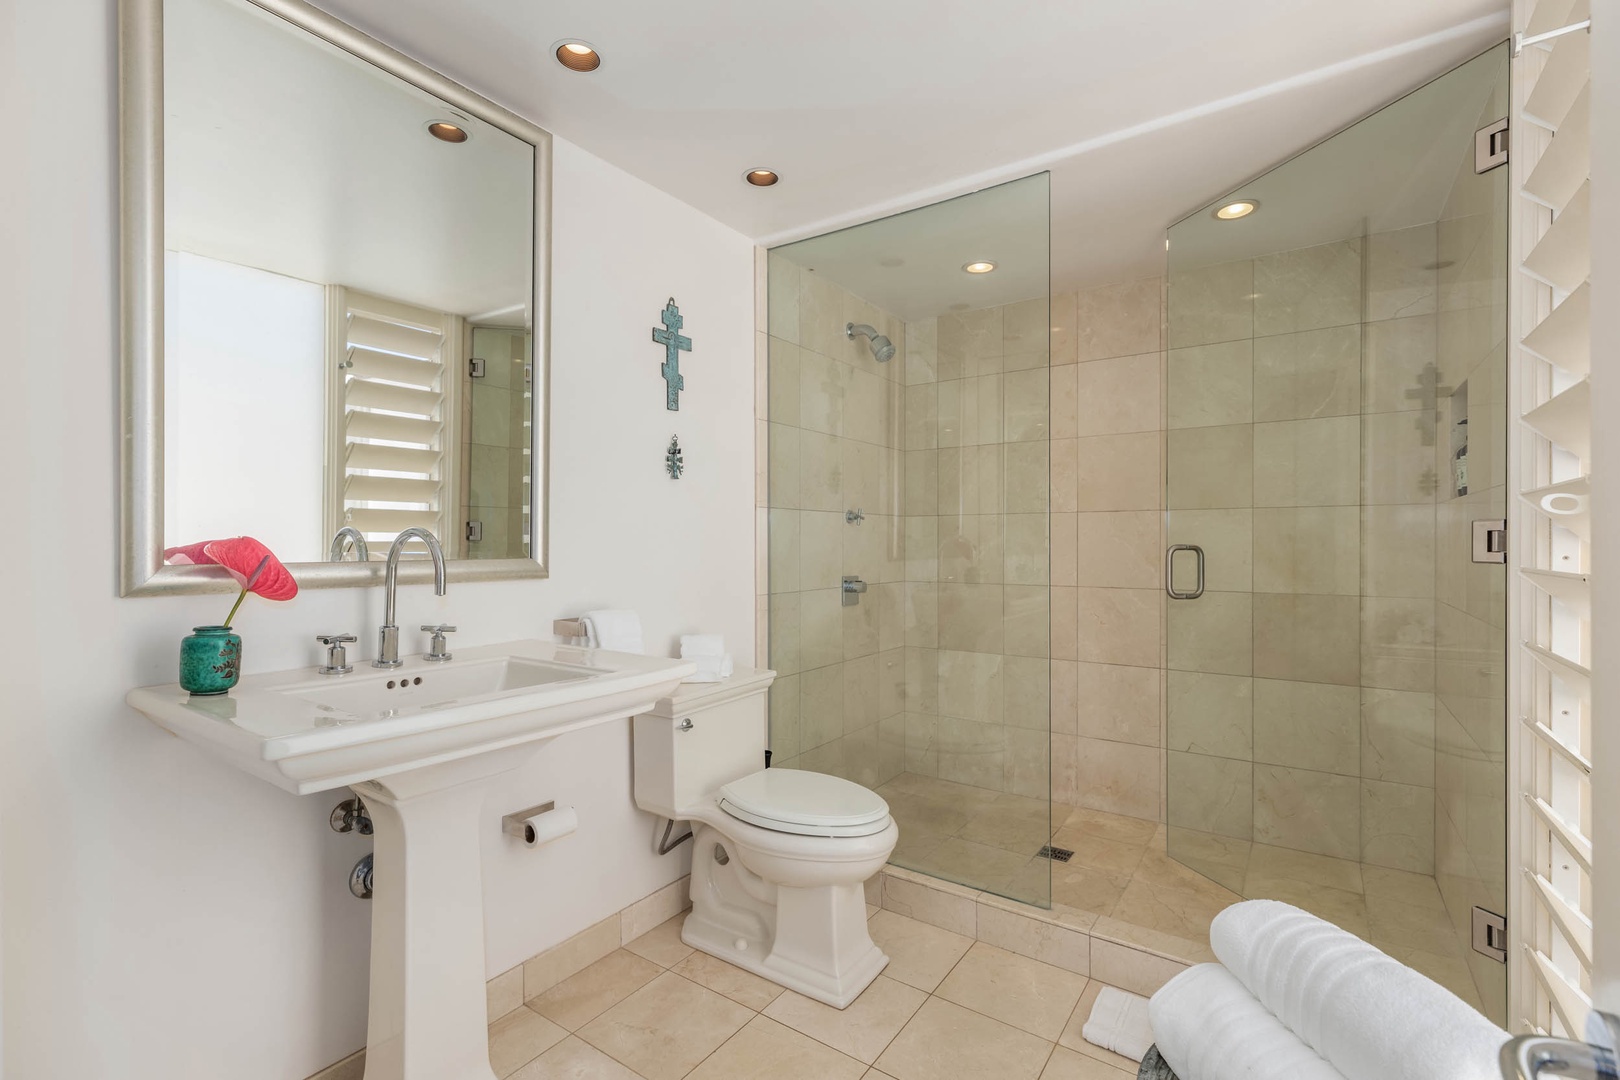 Honolulu Vacation Rentals, Sky Ridge House - Ensuite bath with a walk-in shower in a glass enclosure, single sink and ample vanity space.